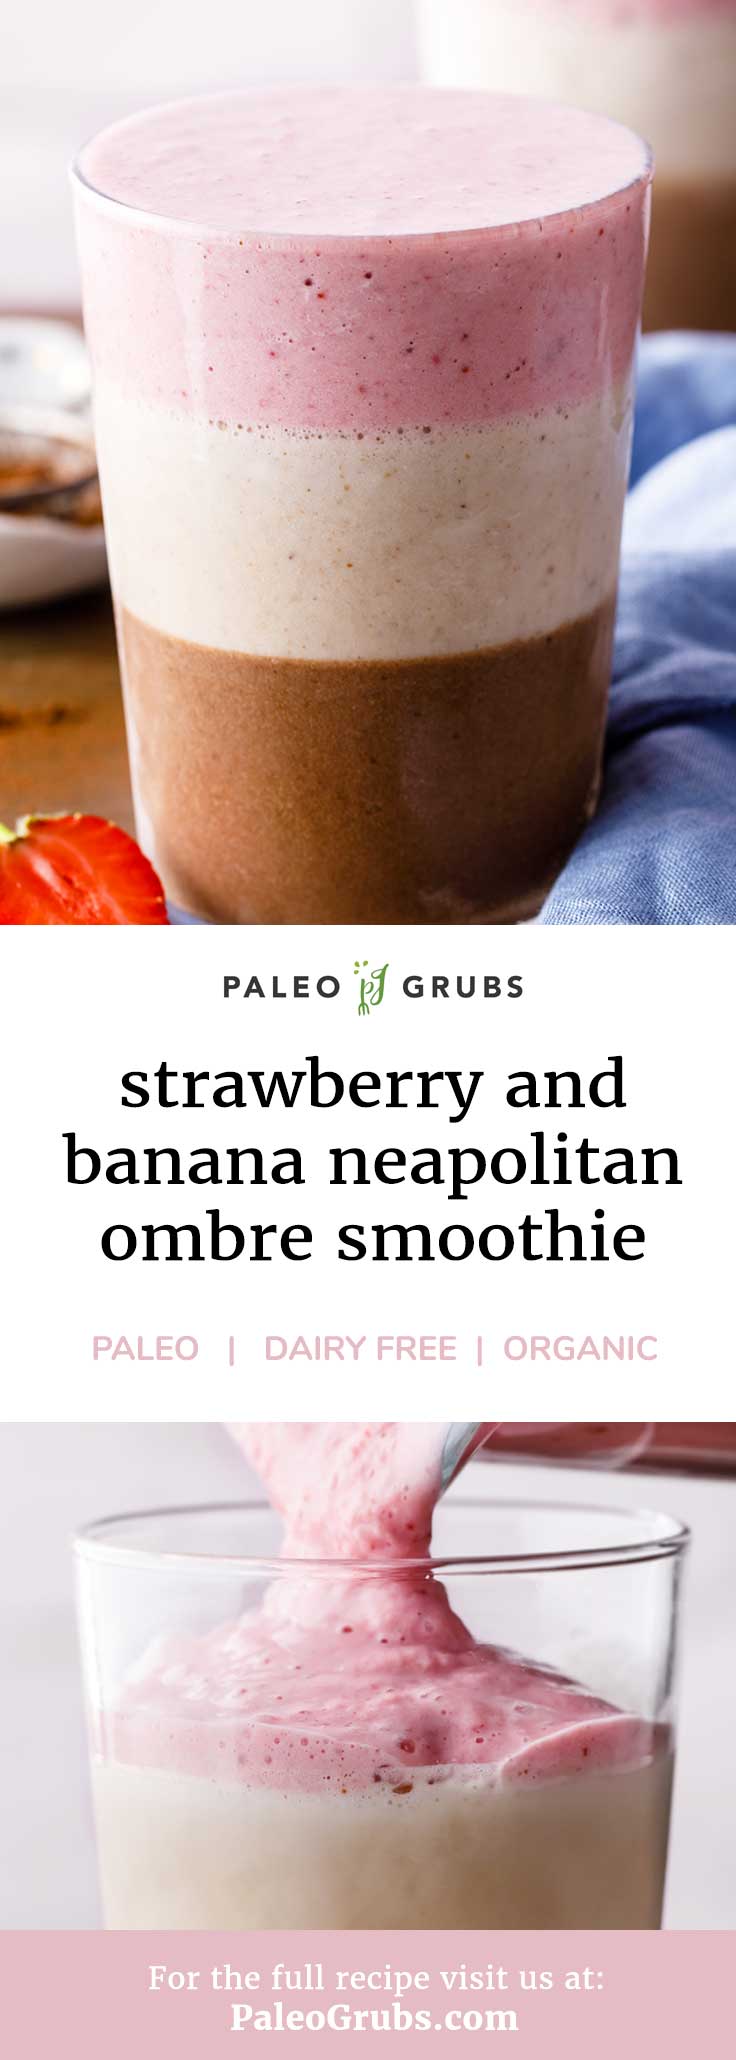 This chocolate, strawberry and banana Neapolitan smoothie is so easy to make and so good! Makes the perfect breakfast dessert meal.